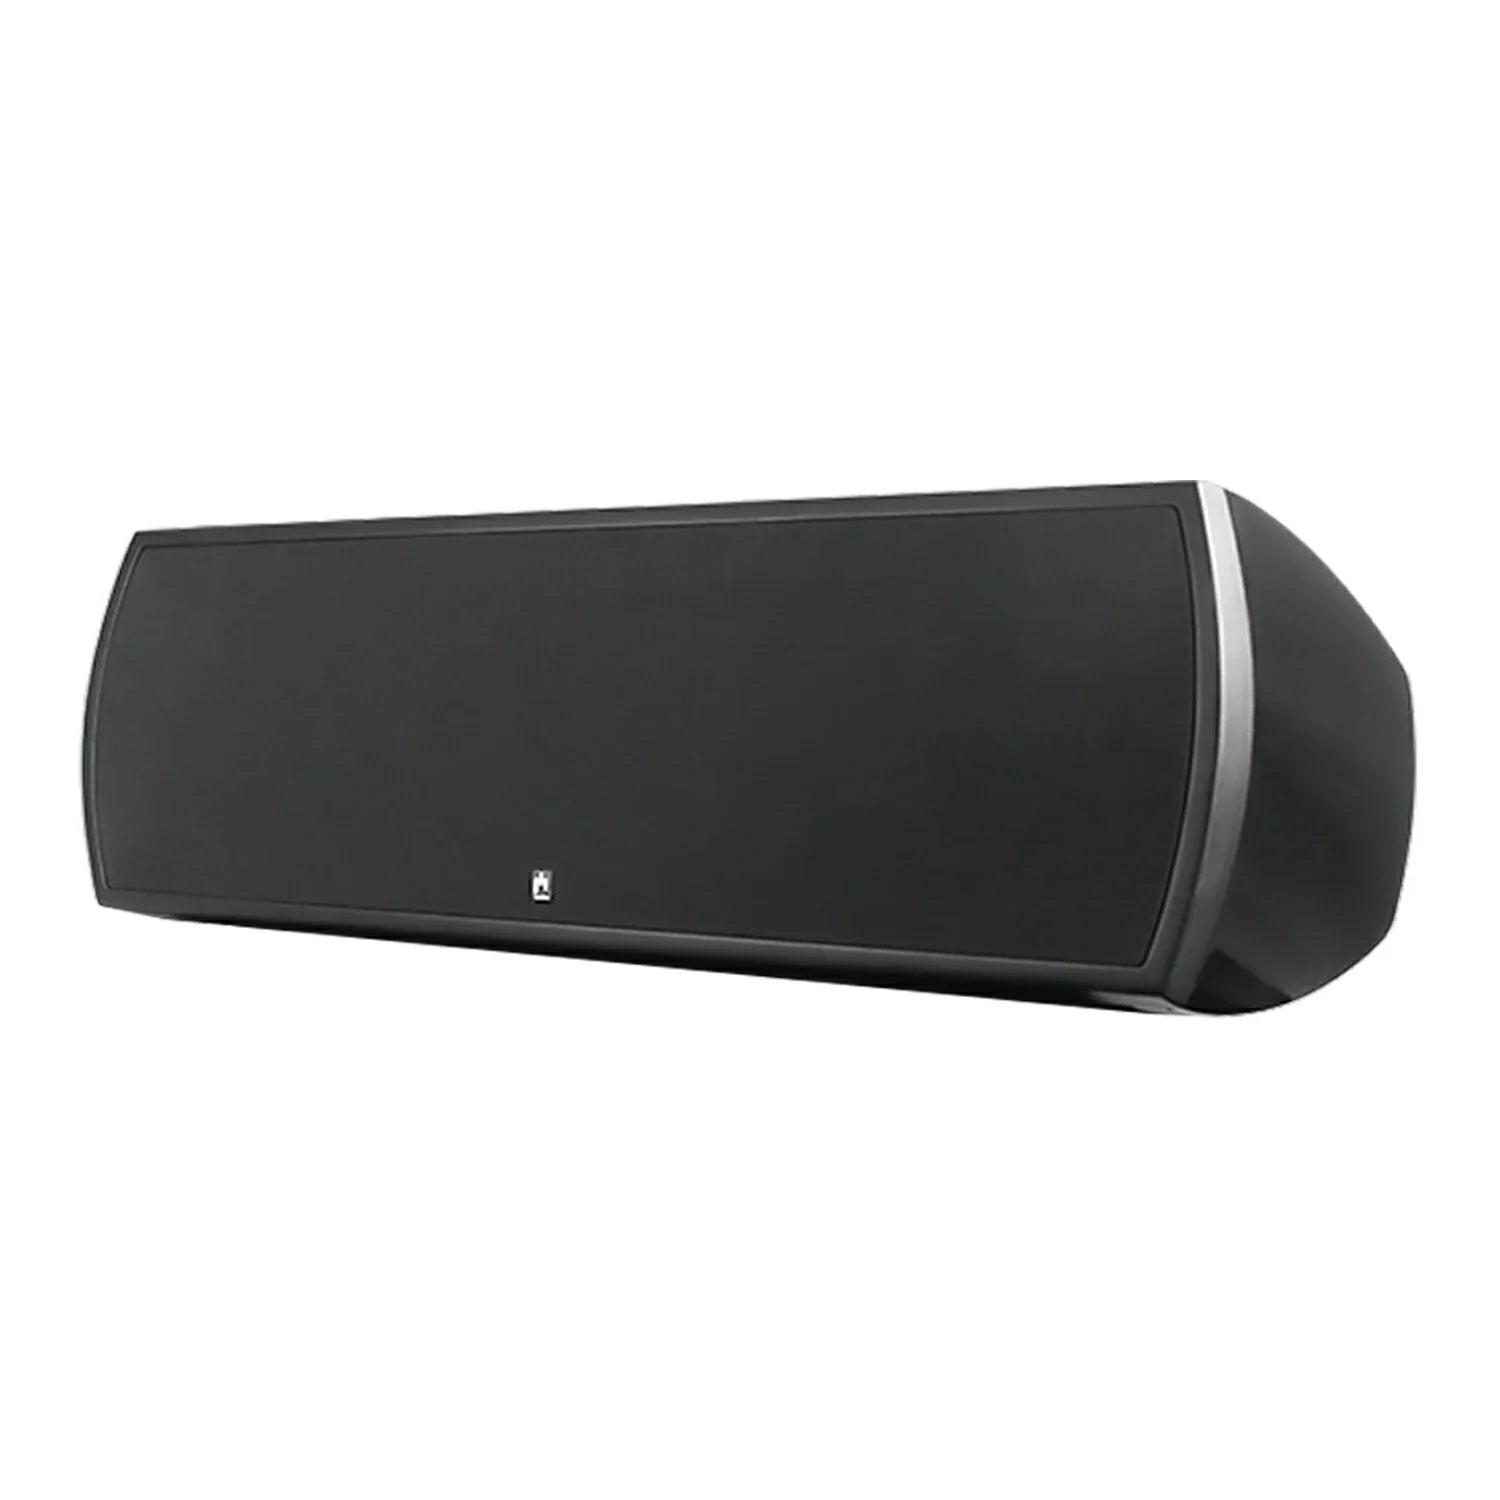 Aperionaudio-Verus-Concert-Dual-8"-Center-Channel-Speaker-Gloss-Black-With-Grille